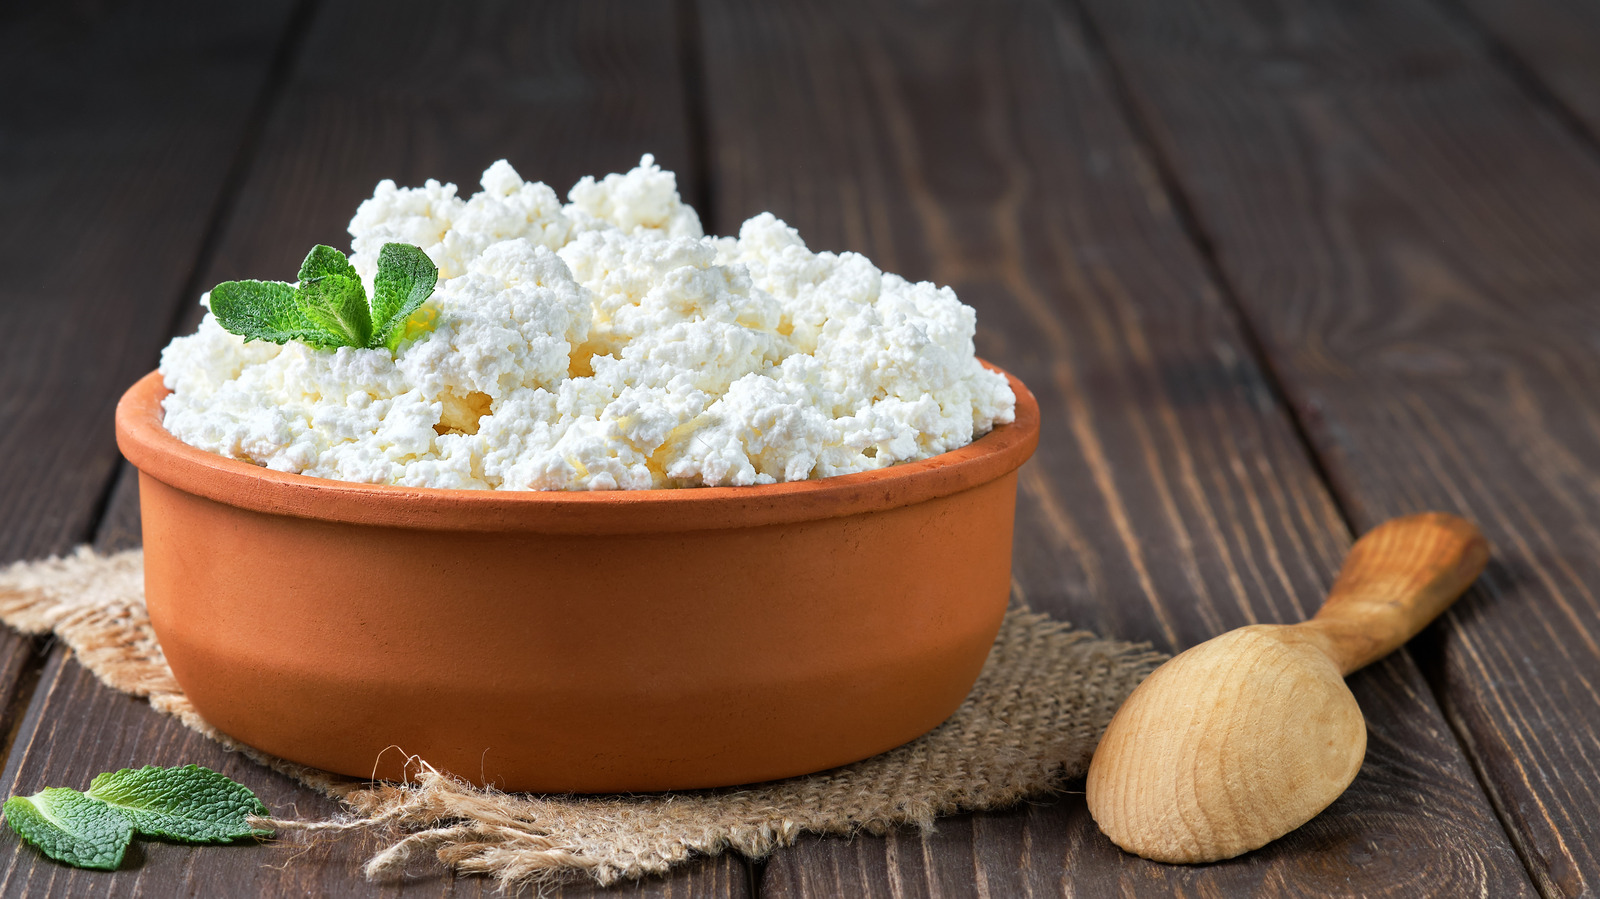 Is Cottage Cheese Good for You? We Explain.